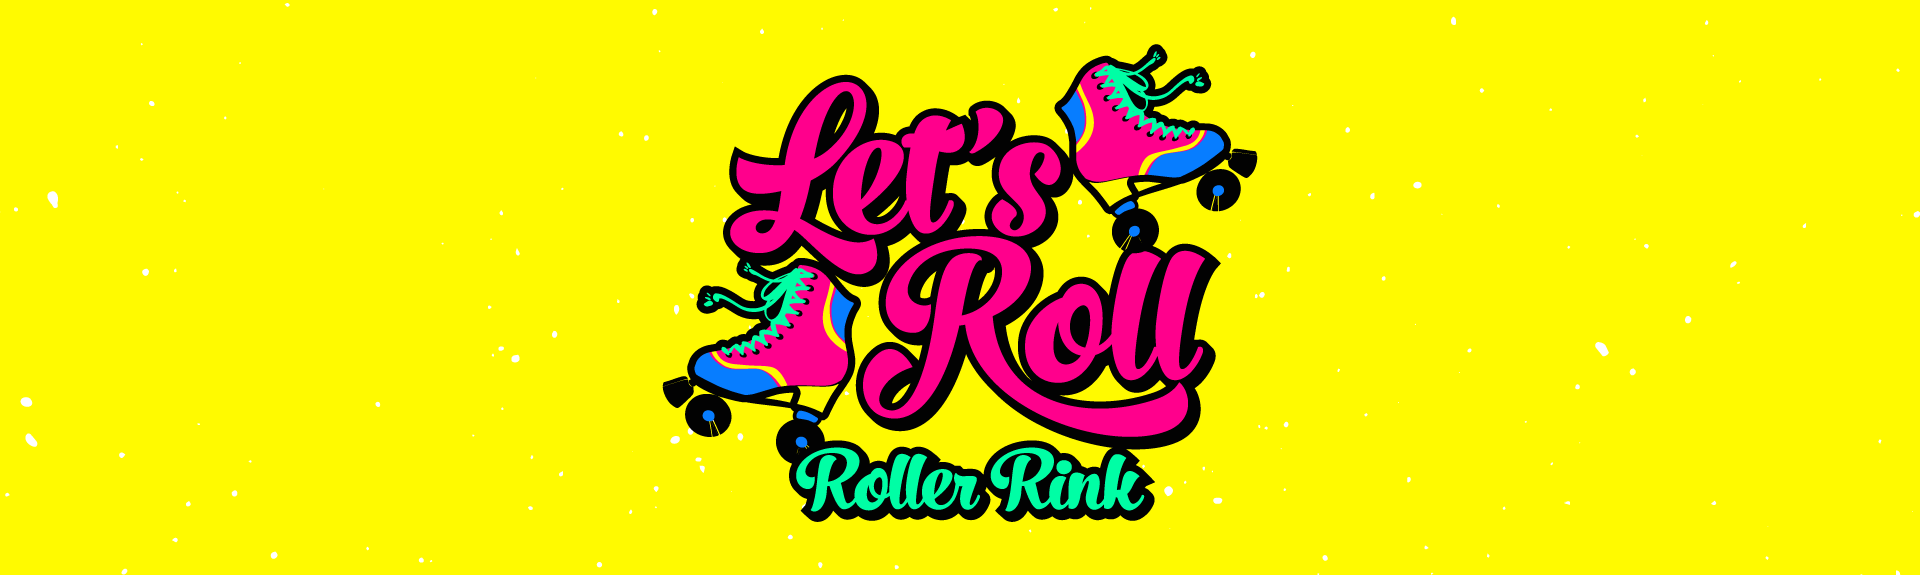 Win 4 x Tickets to the Silent Disco event at Canal Walk’s Let’s Roll Event